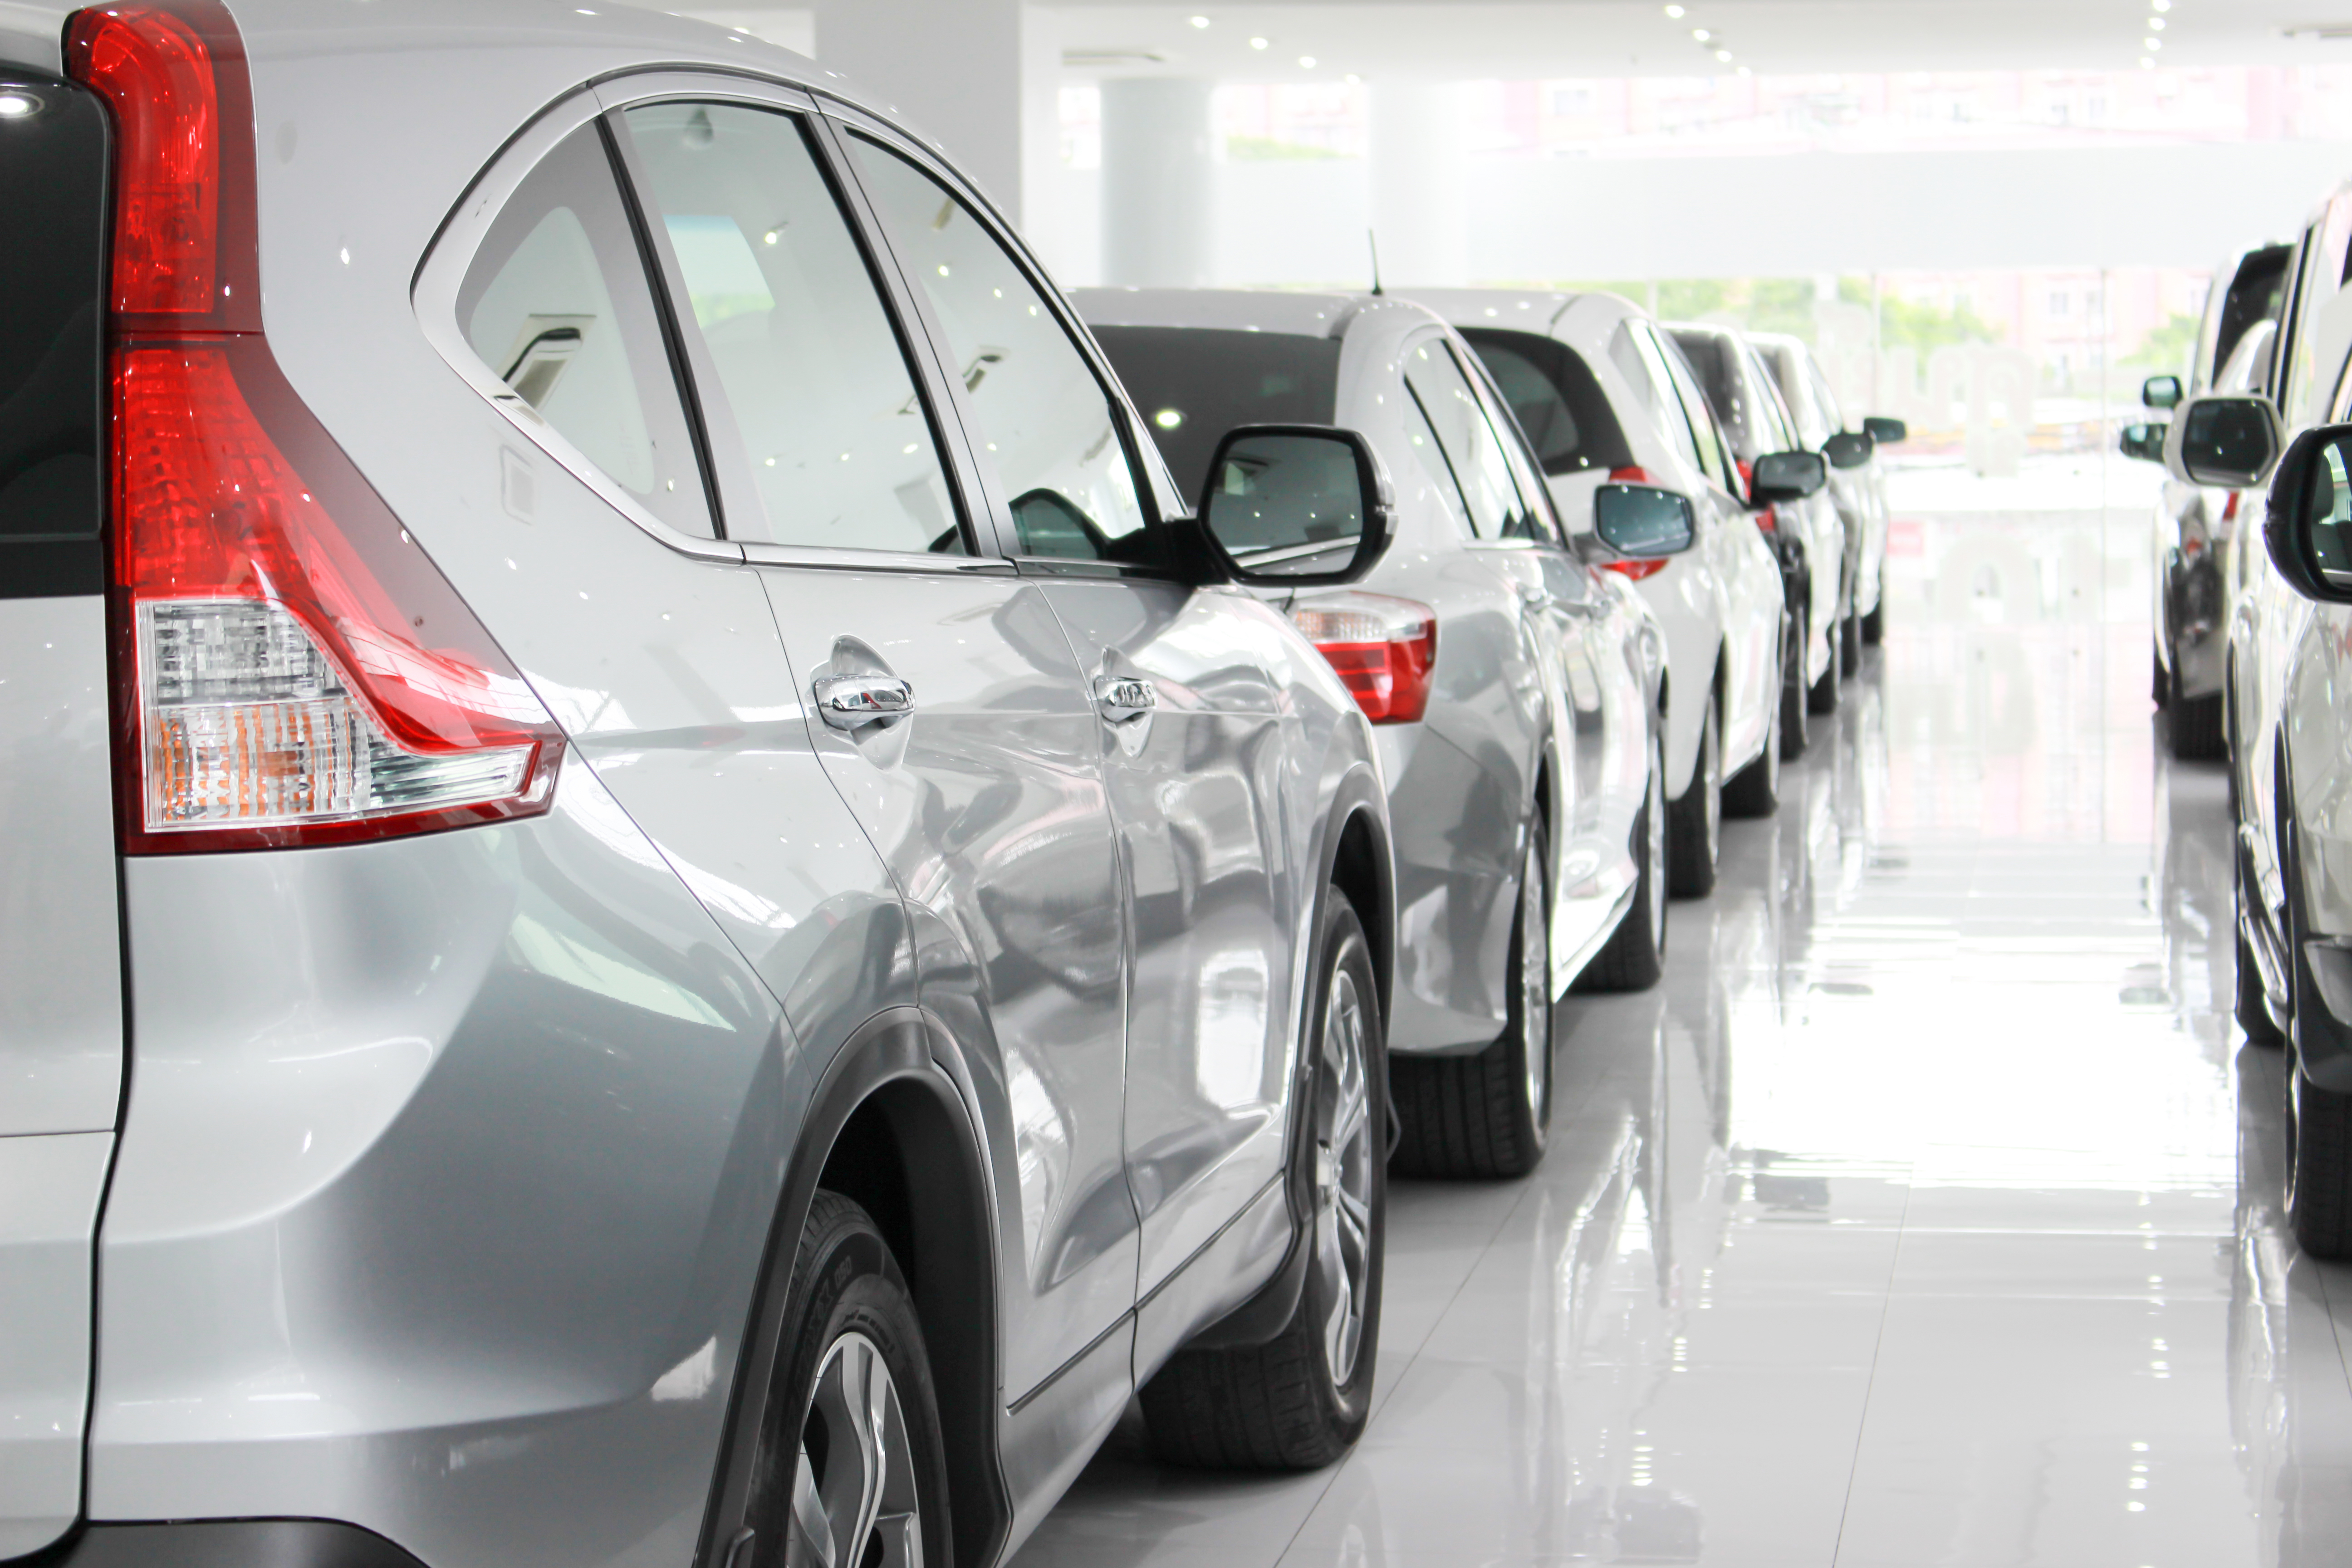 New cars in line in a car showroom